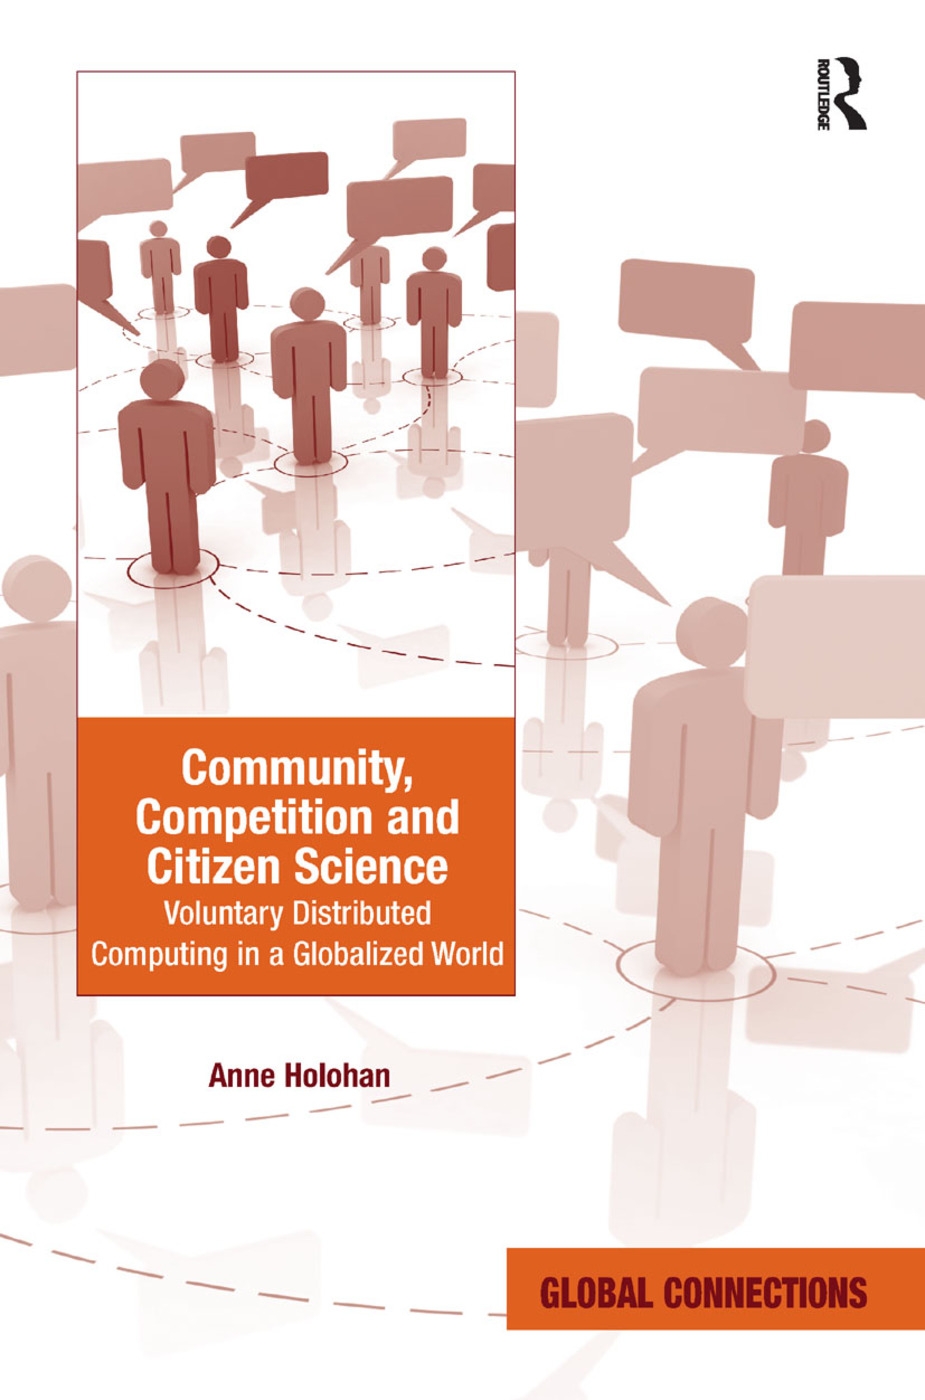 Community, Competition and Citizen Science: Voluntary Distributed Computing in a Globalized World. Anne Holohan